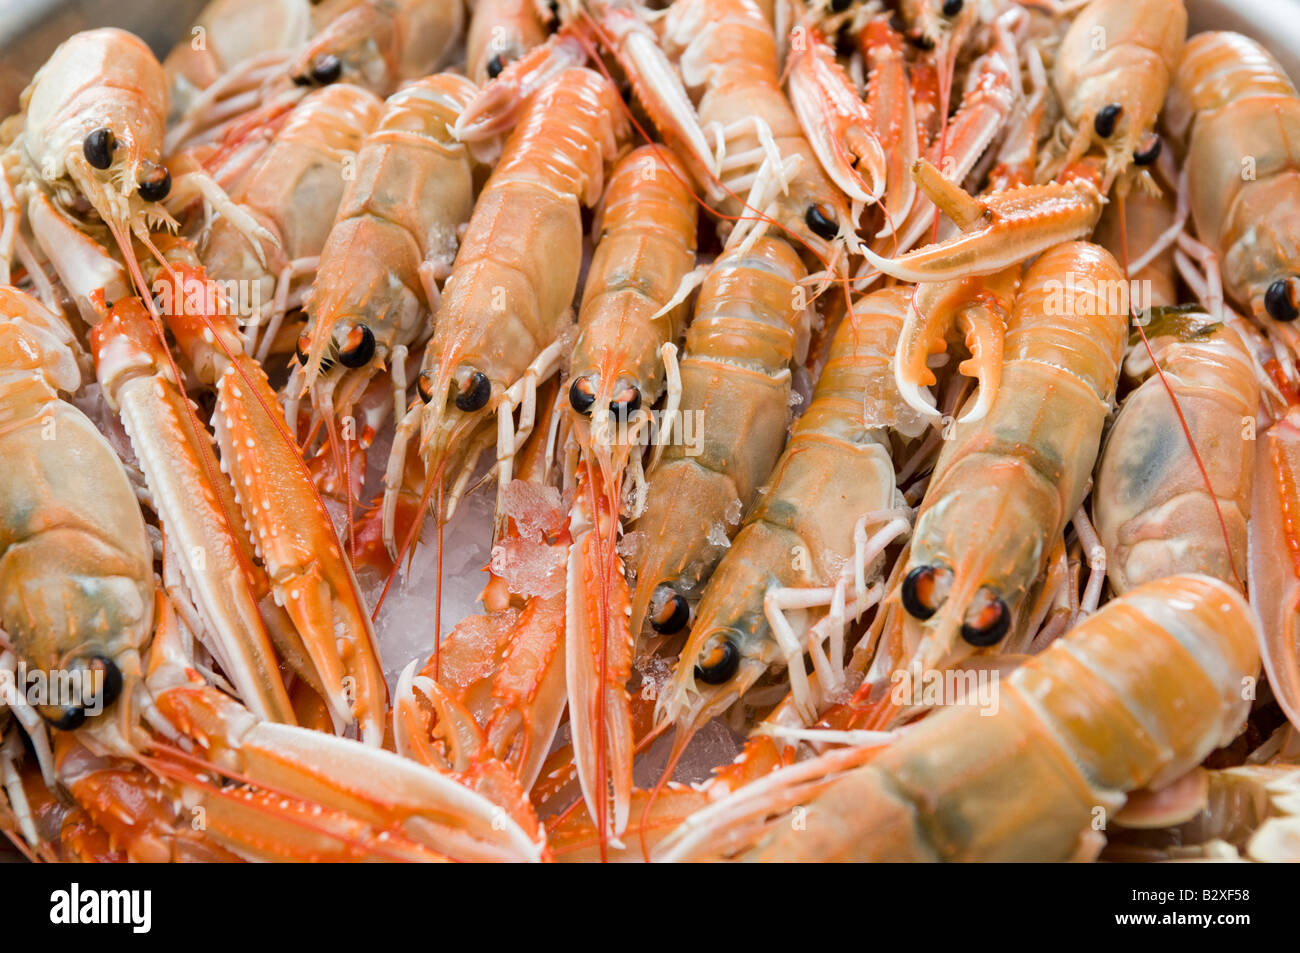 fresh caught cardigan bay langoustine seafood [also known as Norway lobster] Stock Photo